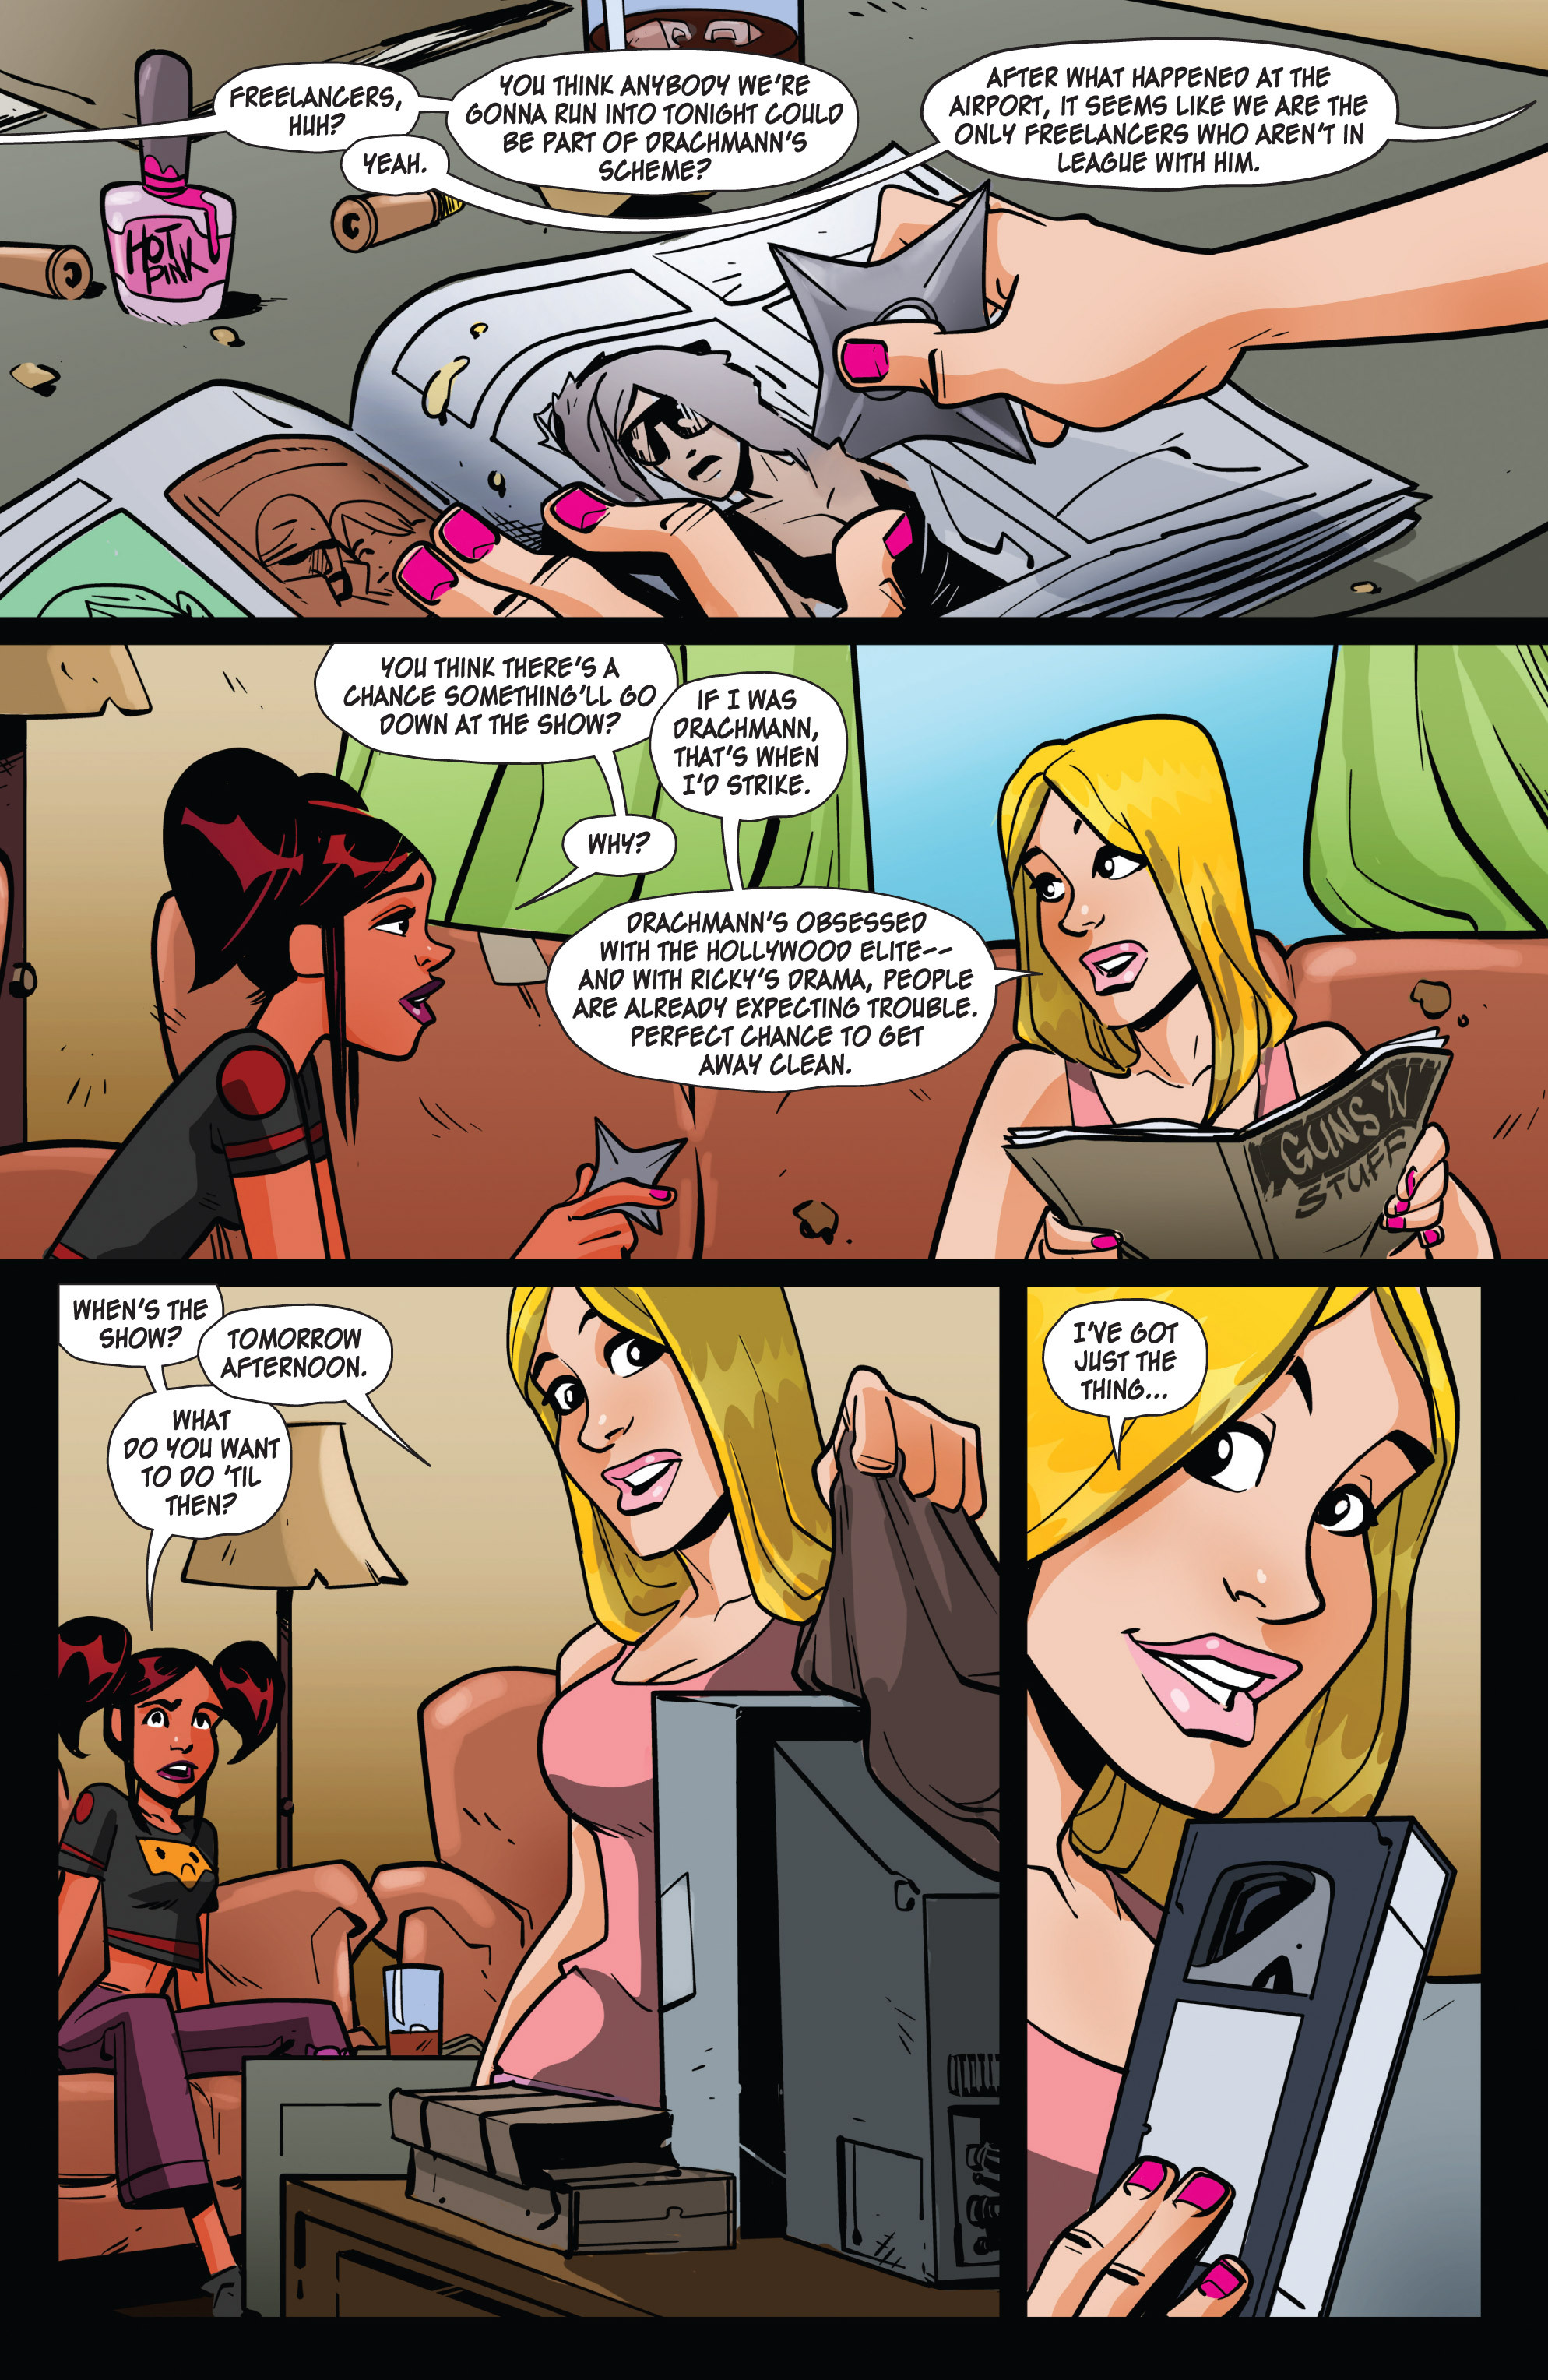 Read online Freelancers comic -  Issue #4 - 8